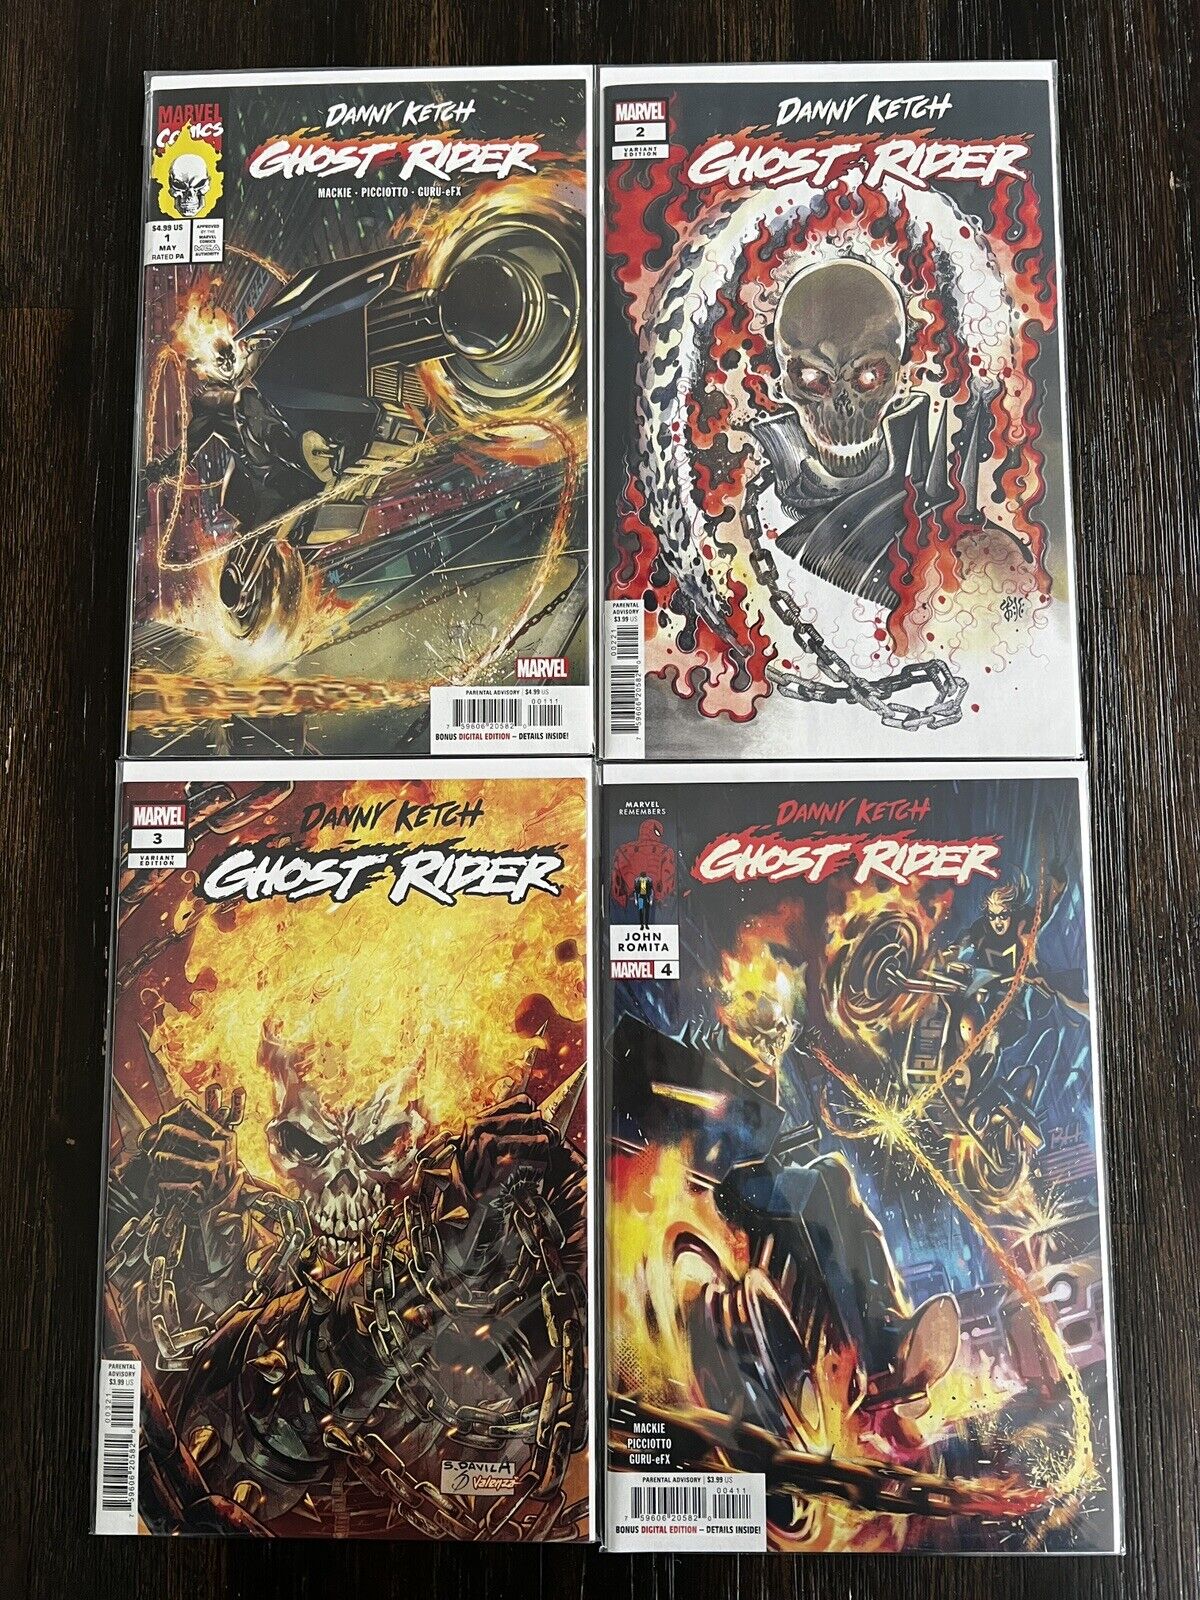 Danny Ketch Ghost Rider Complete Set 1 2 3 4 VF/NM Ft. MoMoKo Variant Cover